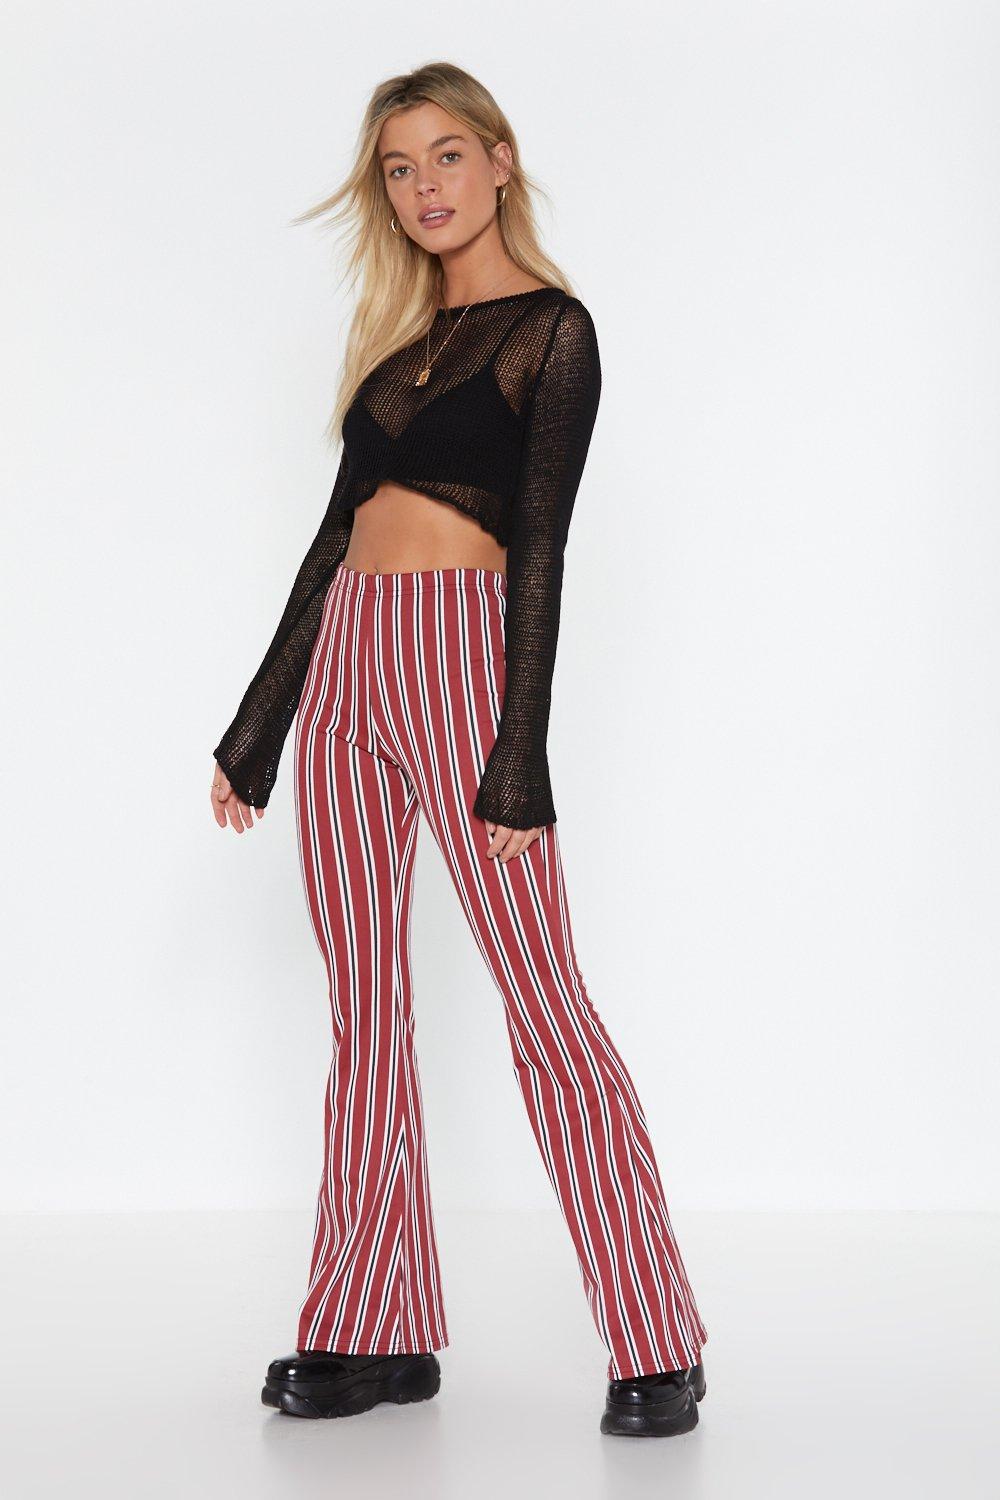 flare striped pants